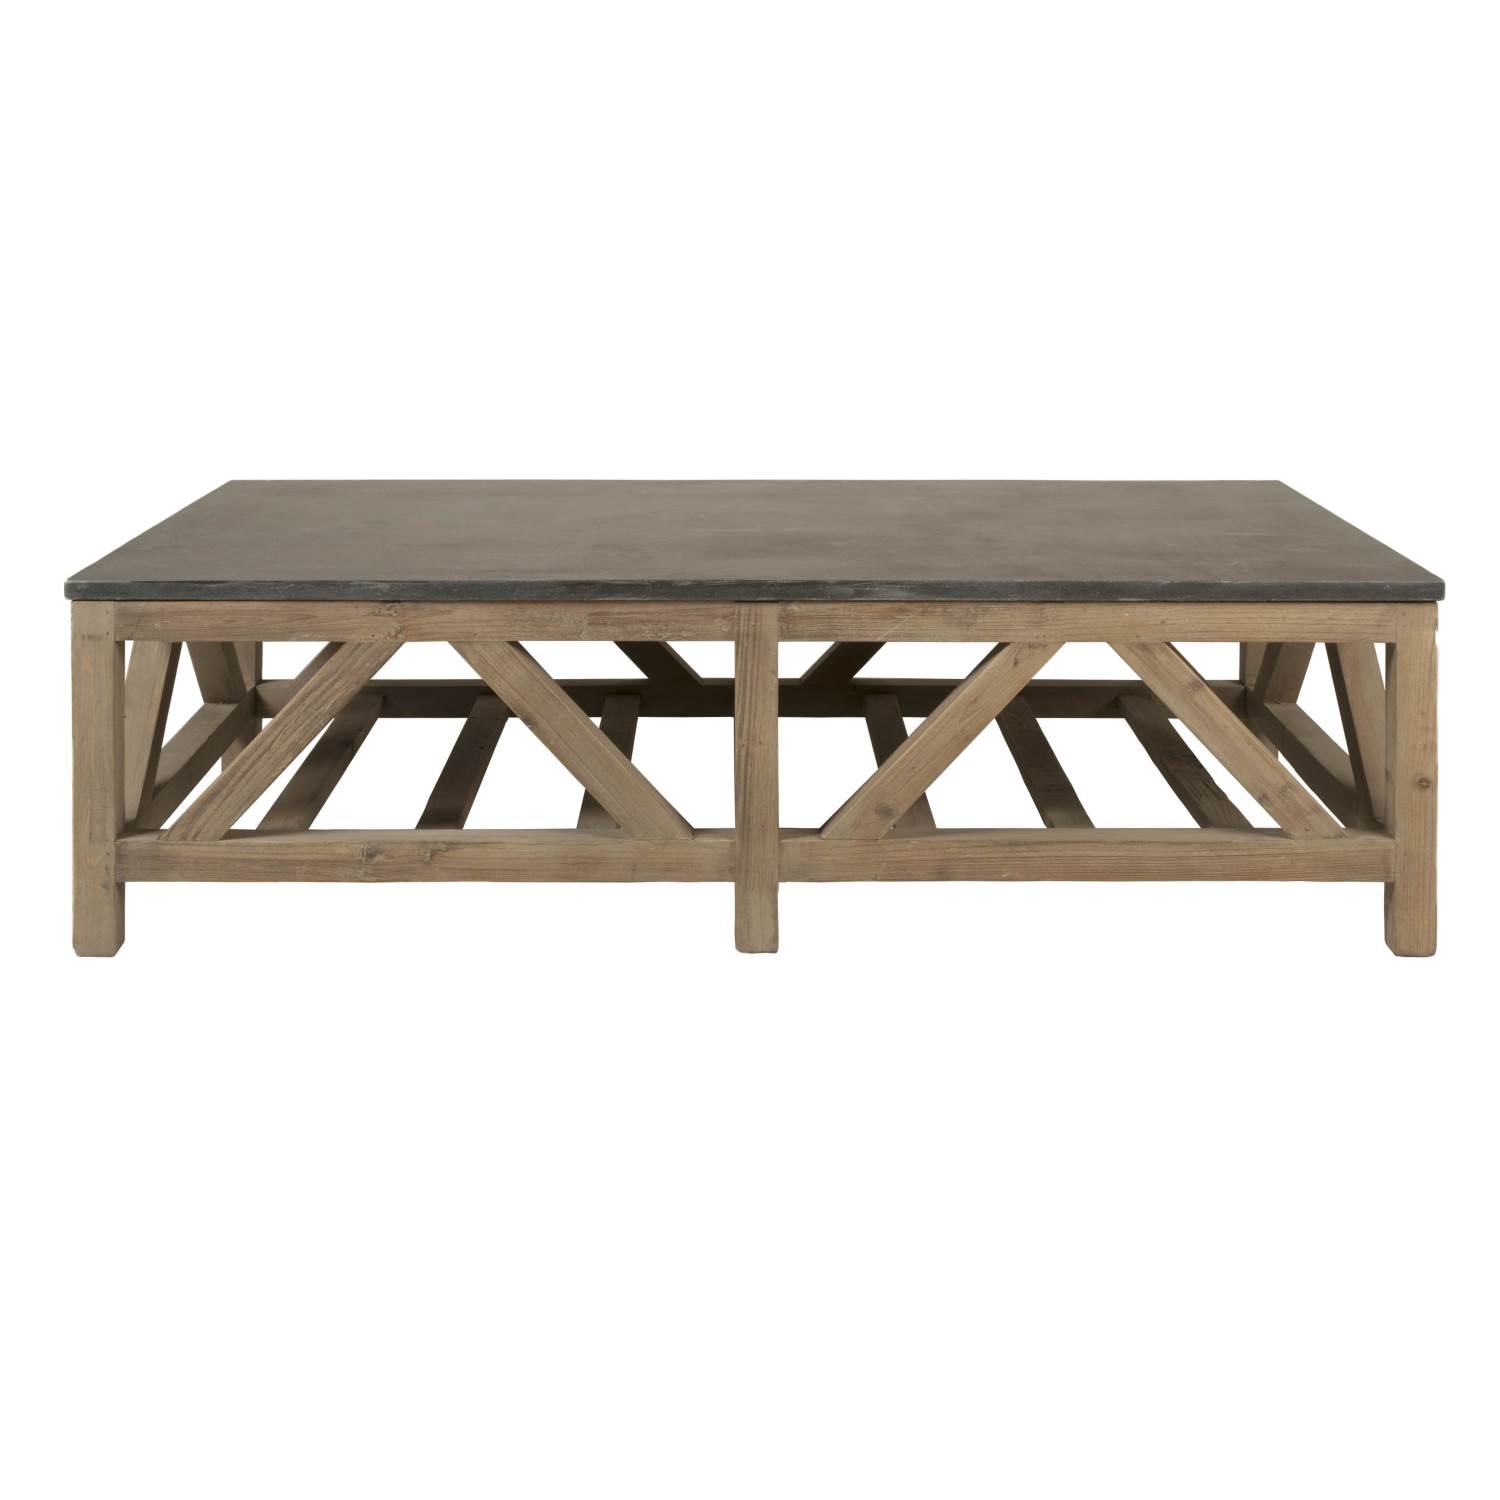 BLUE STONE COFFEE TABLE - Image 0